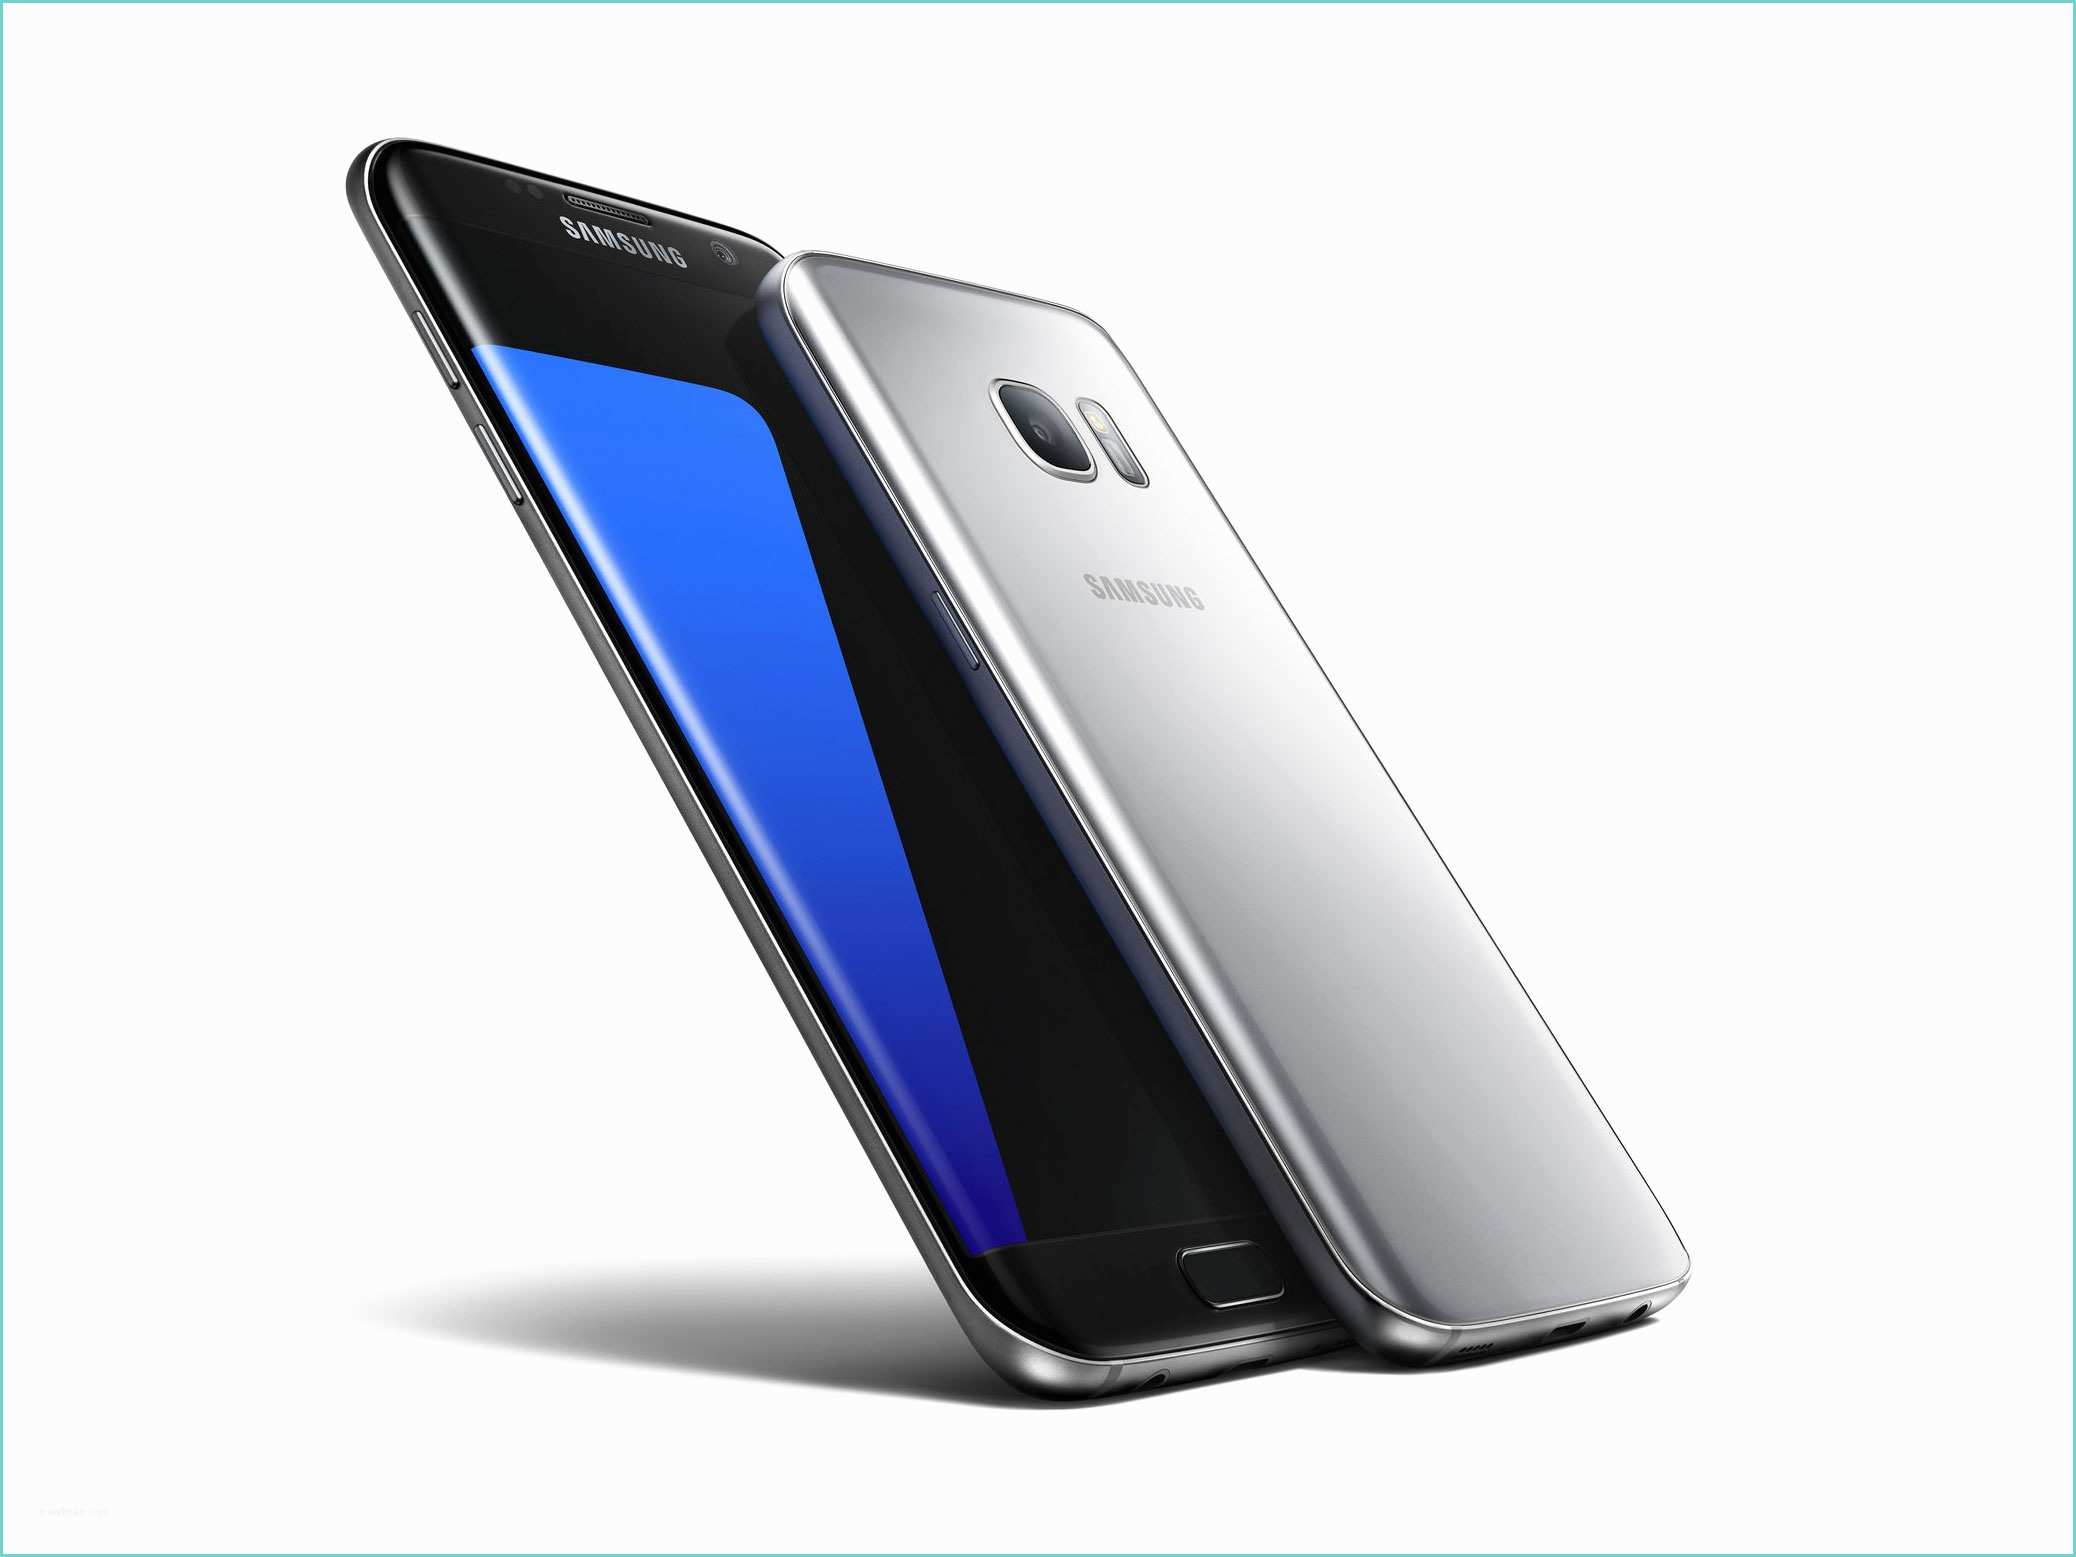 Mediaworld Samsung S7 Edge Samsung Launches Galaxy S7 and S7 Edge with Dual Pixel Af